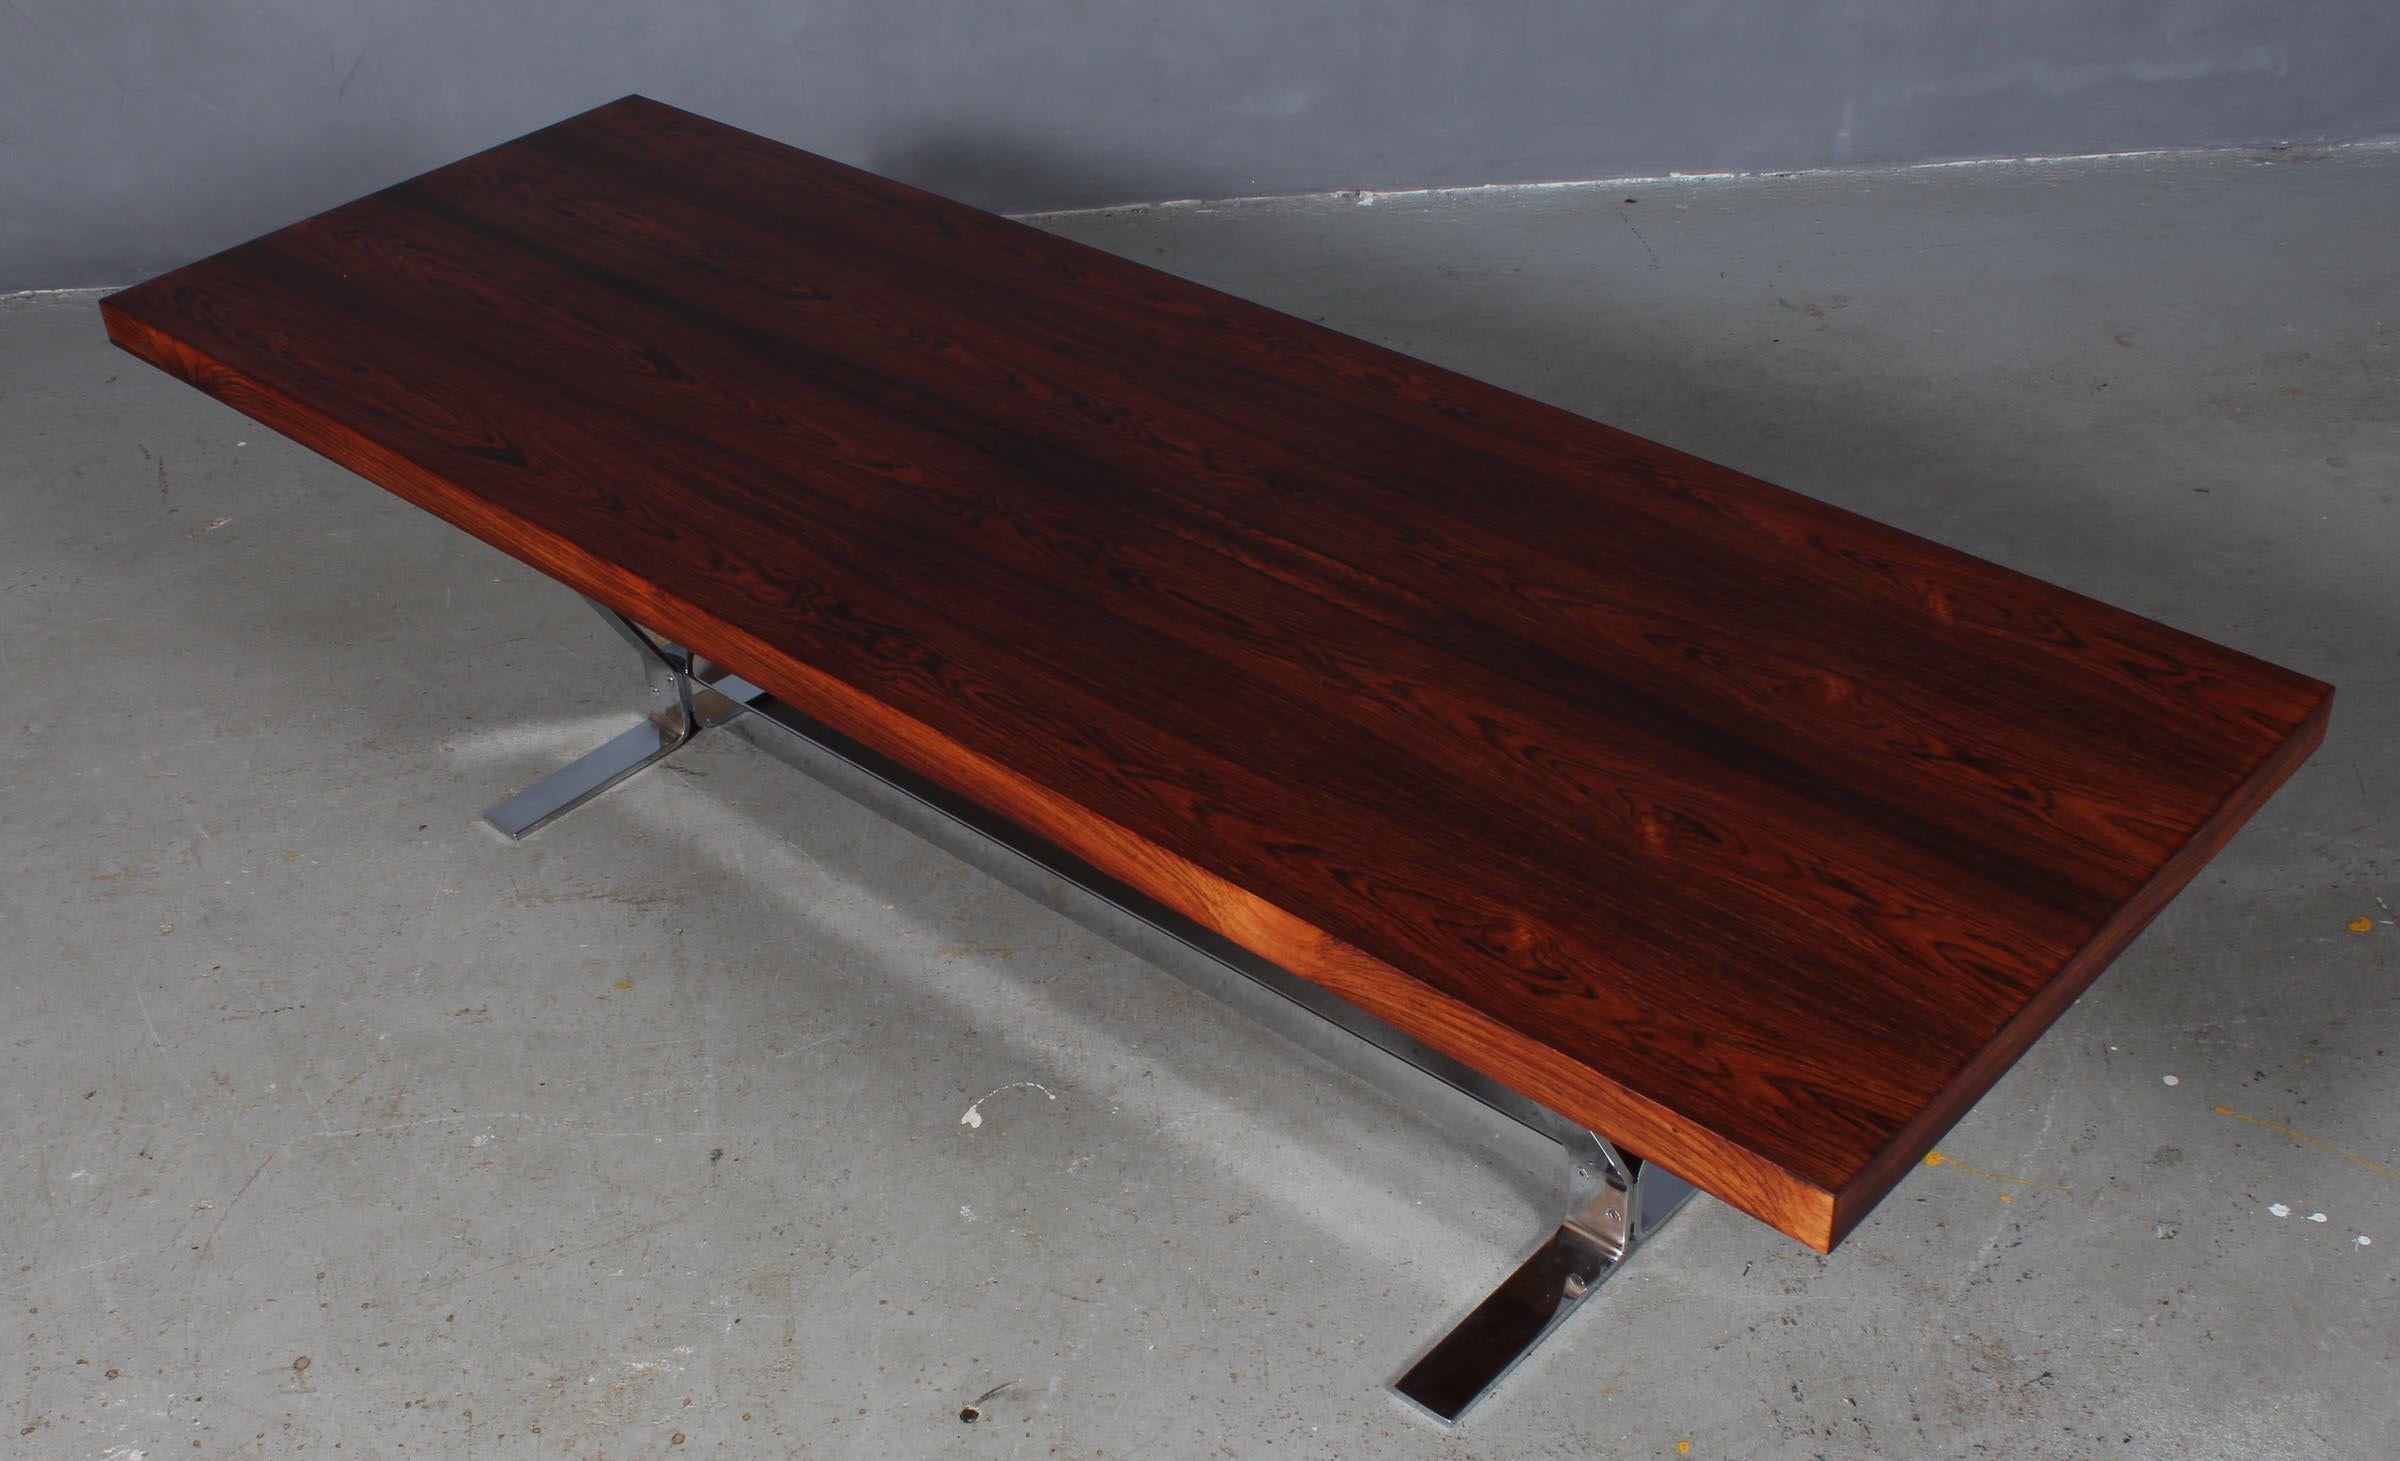 Heltborg coffee table in rosewood. Frame of chromed steel.

Made by Heltborg Møbler.